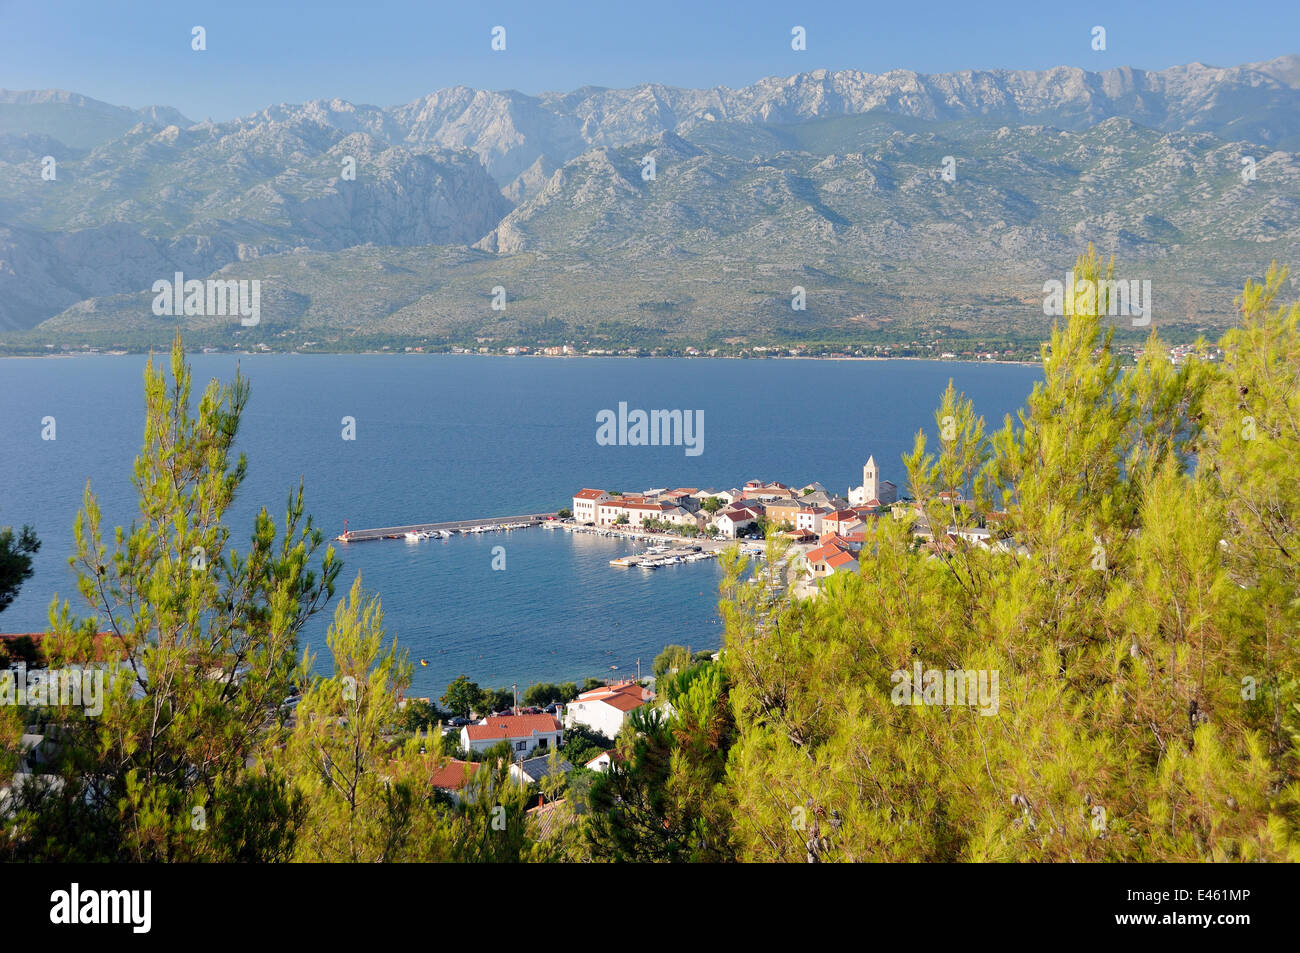 Overview of Vinjerac fishing village and harbour with Pine trees (Pinus sp.) in the foreground and the karst limestone Velebit mountain range of the Dinaric Alps in the background, Zadar province, Croatia, July 2010. Stock Photo